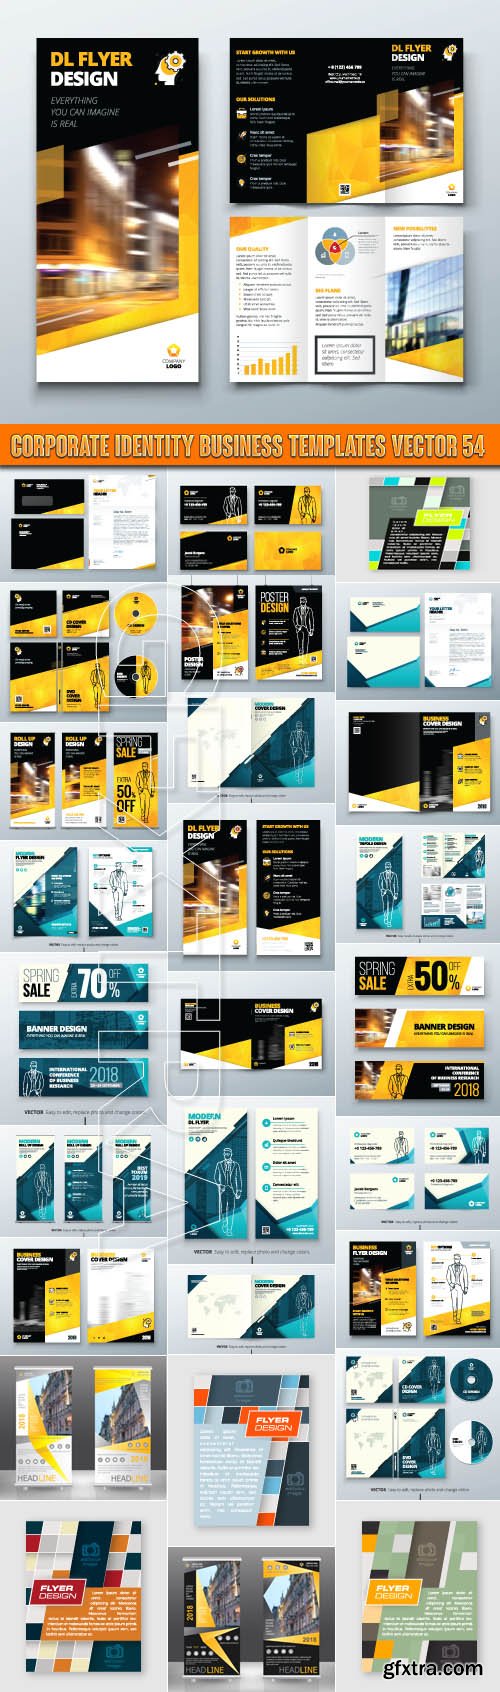 Corporate identity business templates vector 54